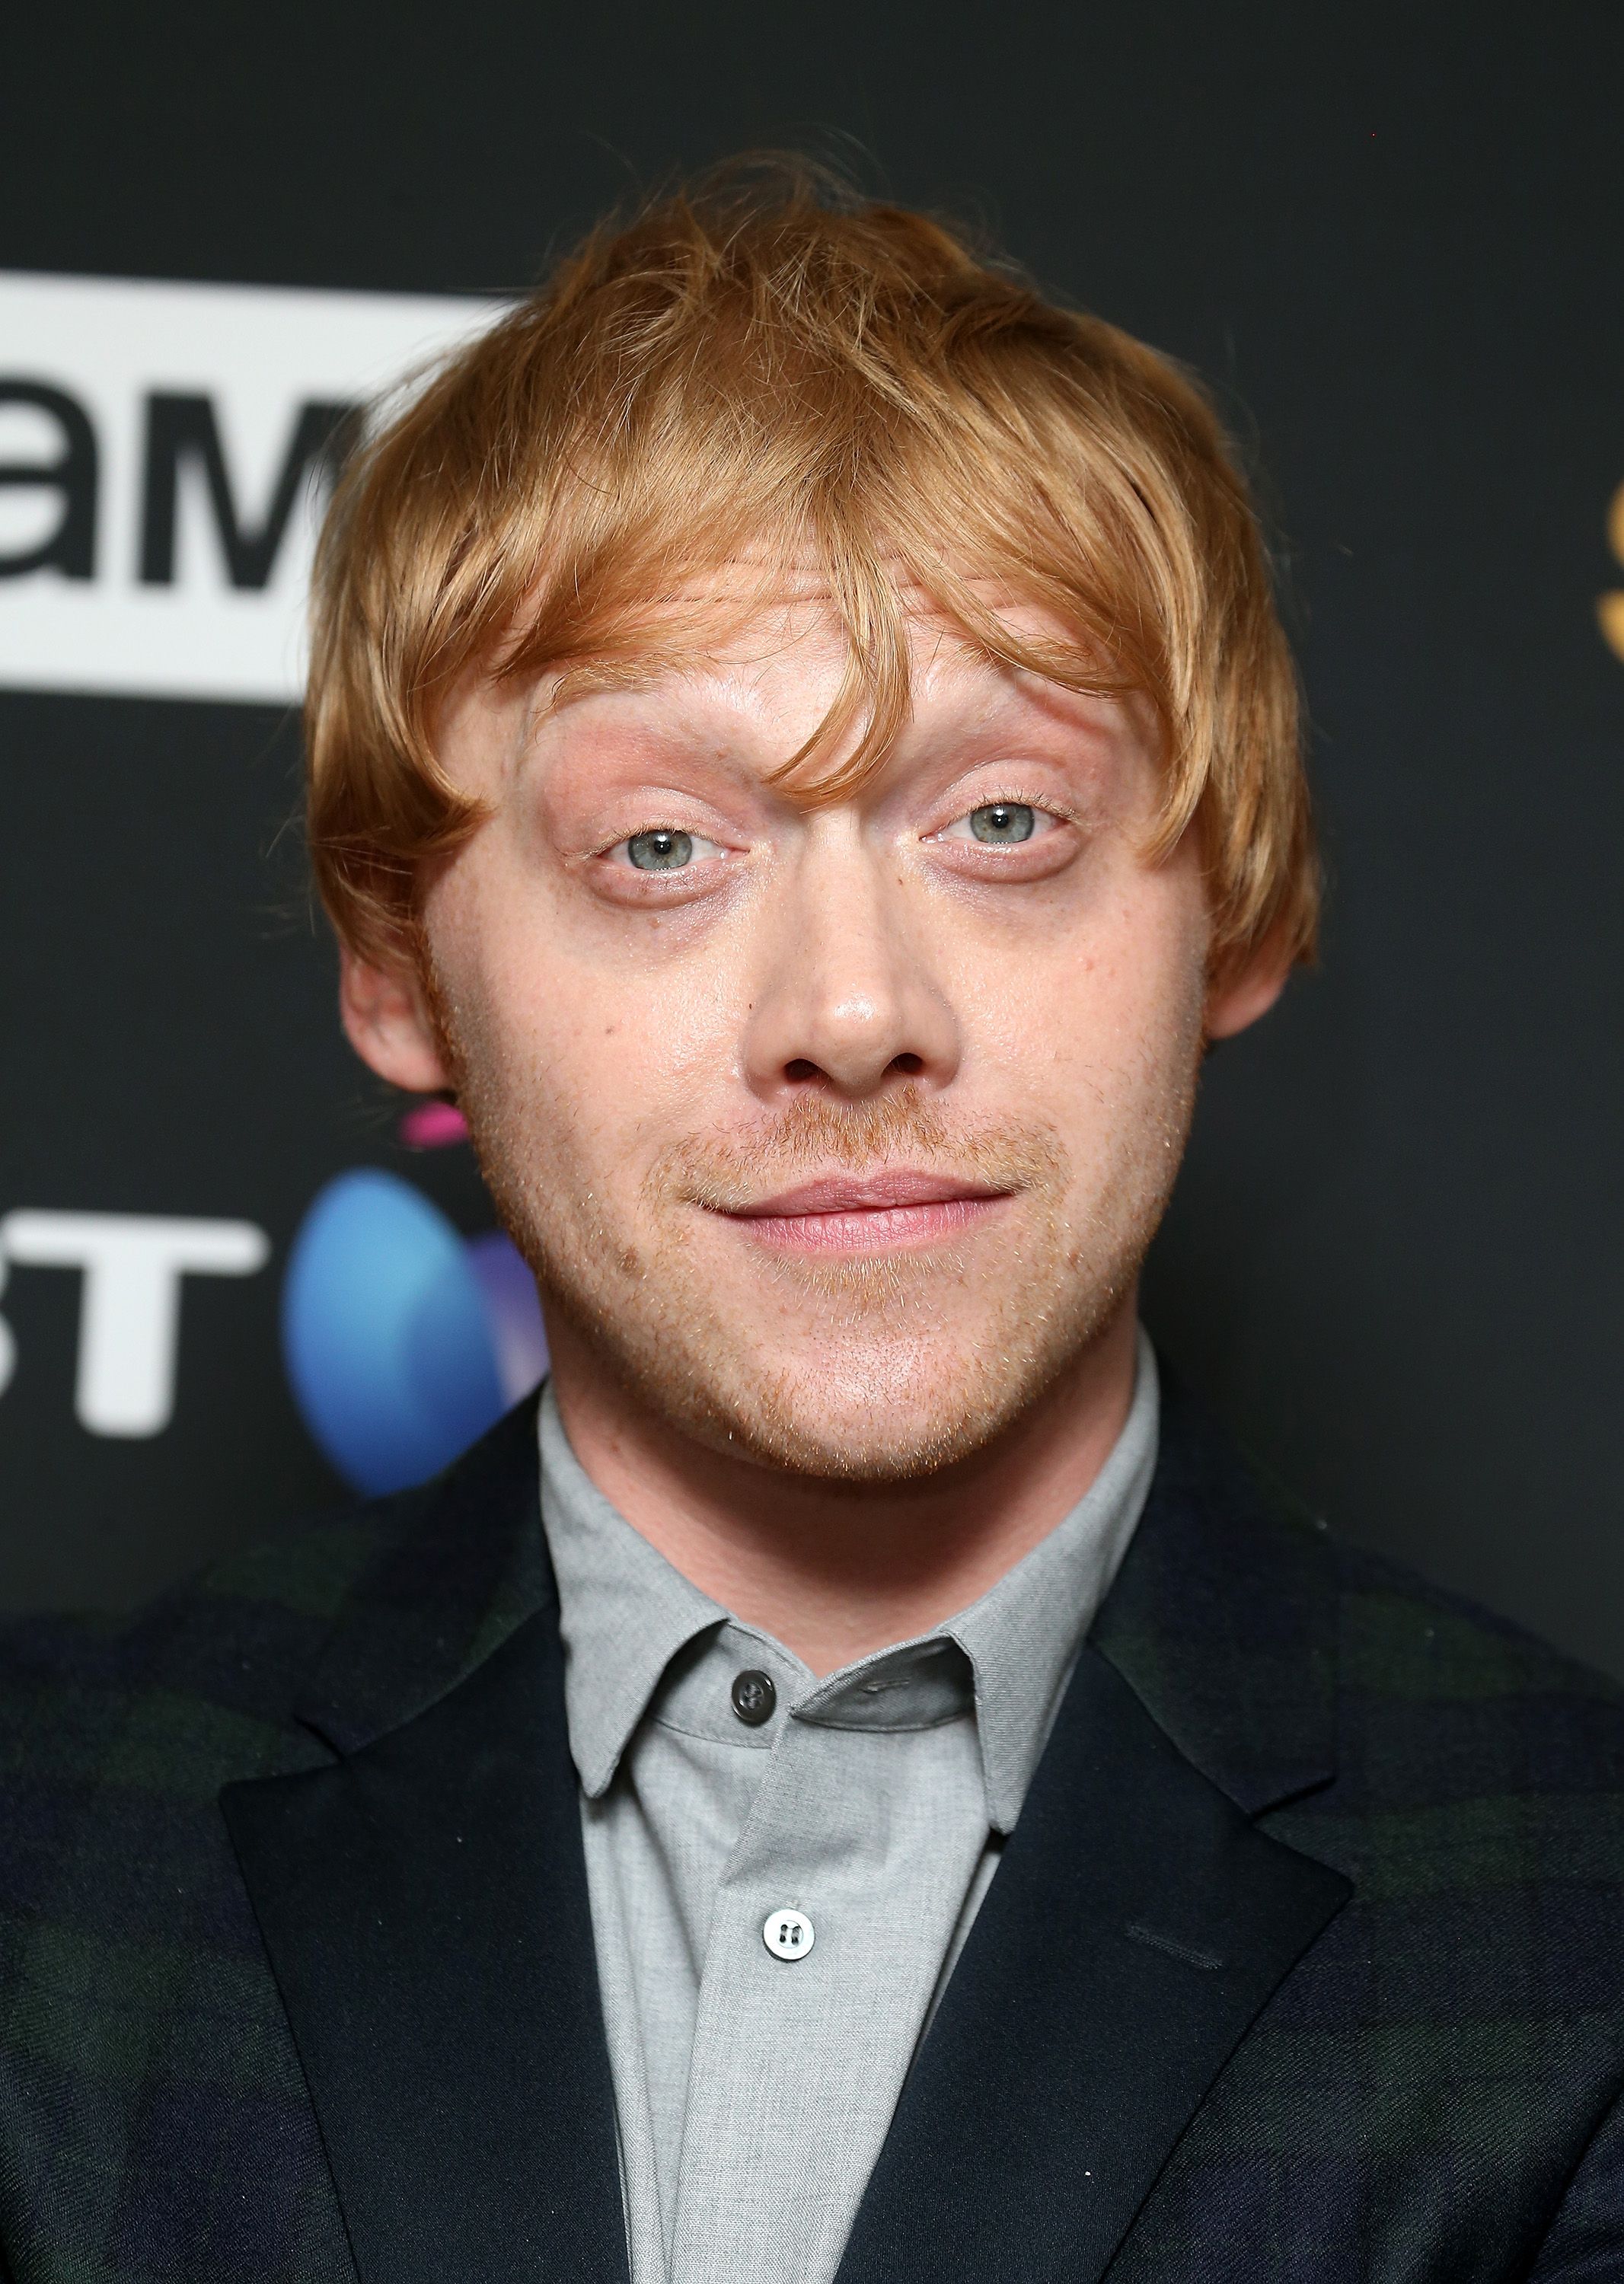 Rupert Grint at the "Snatch" TV show premiere at BT Tower on September 28, 2017, in London, England | Photo: Fred Duval/FilmMagic/Getty Images